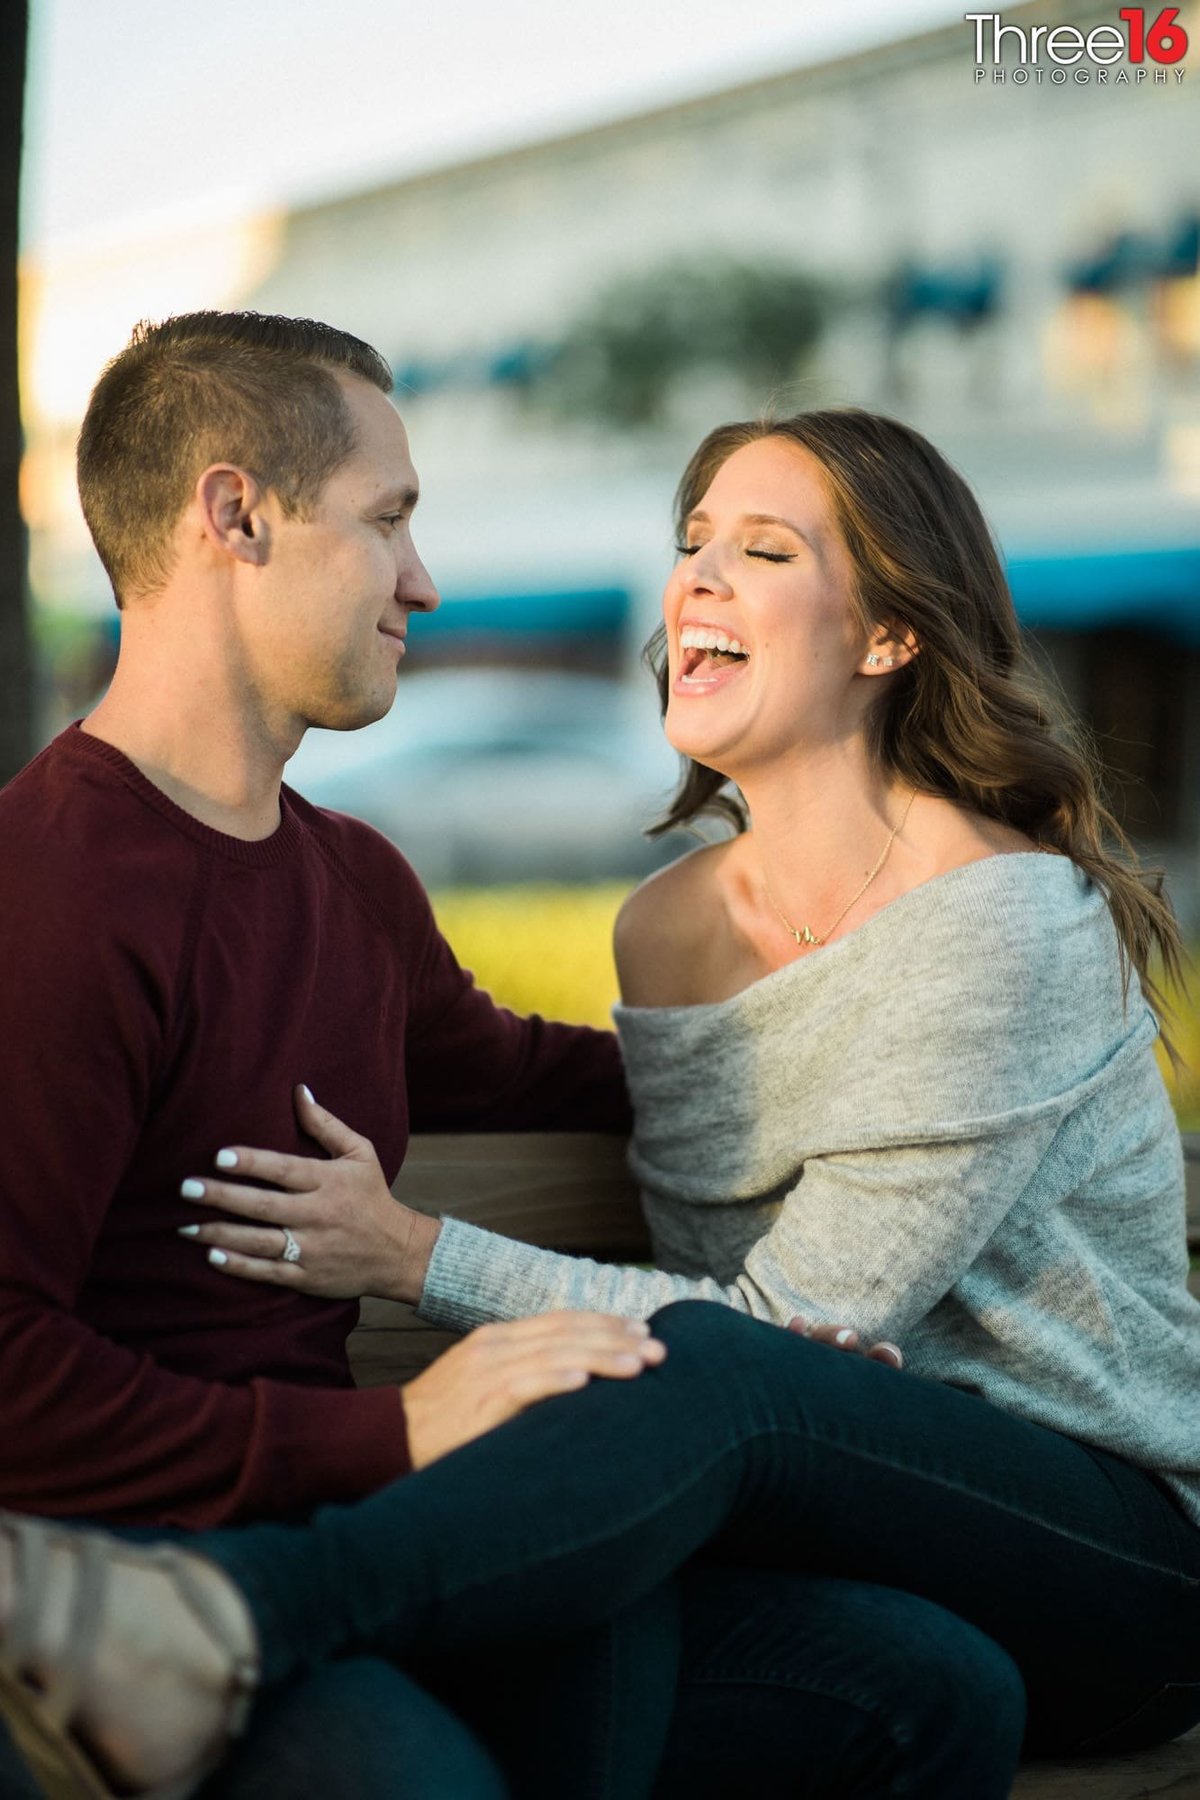 Groom to be causes his fiance to laugh out loud